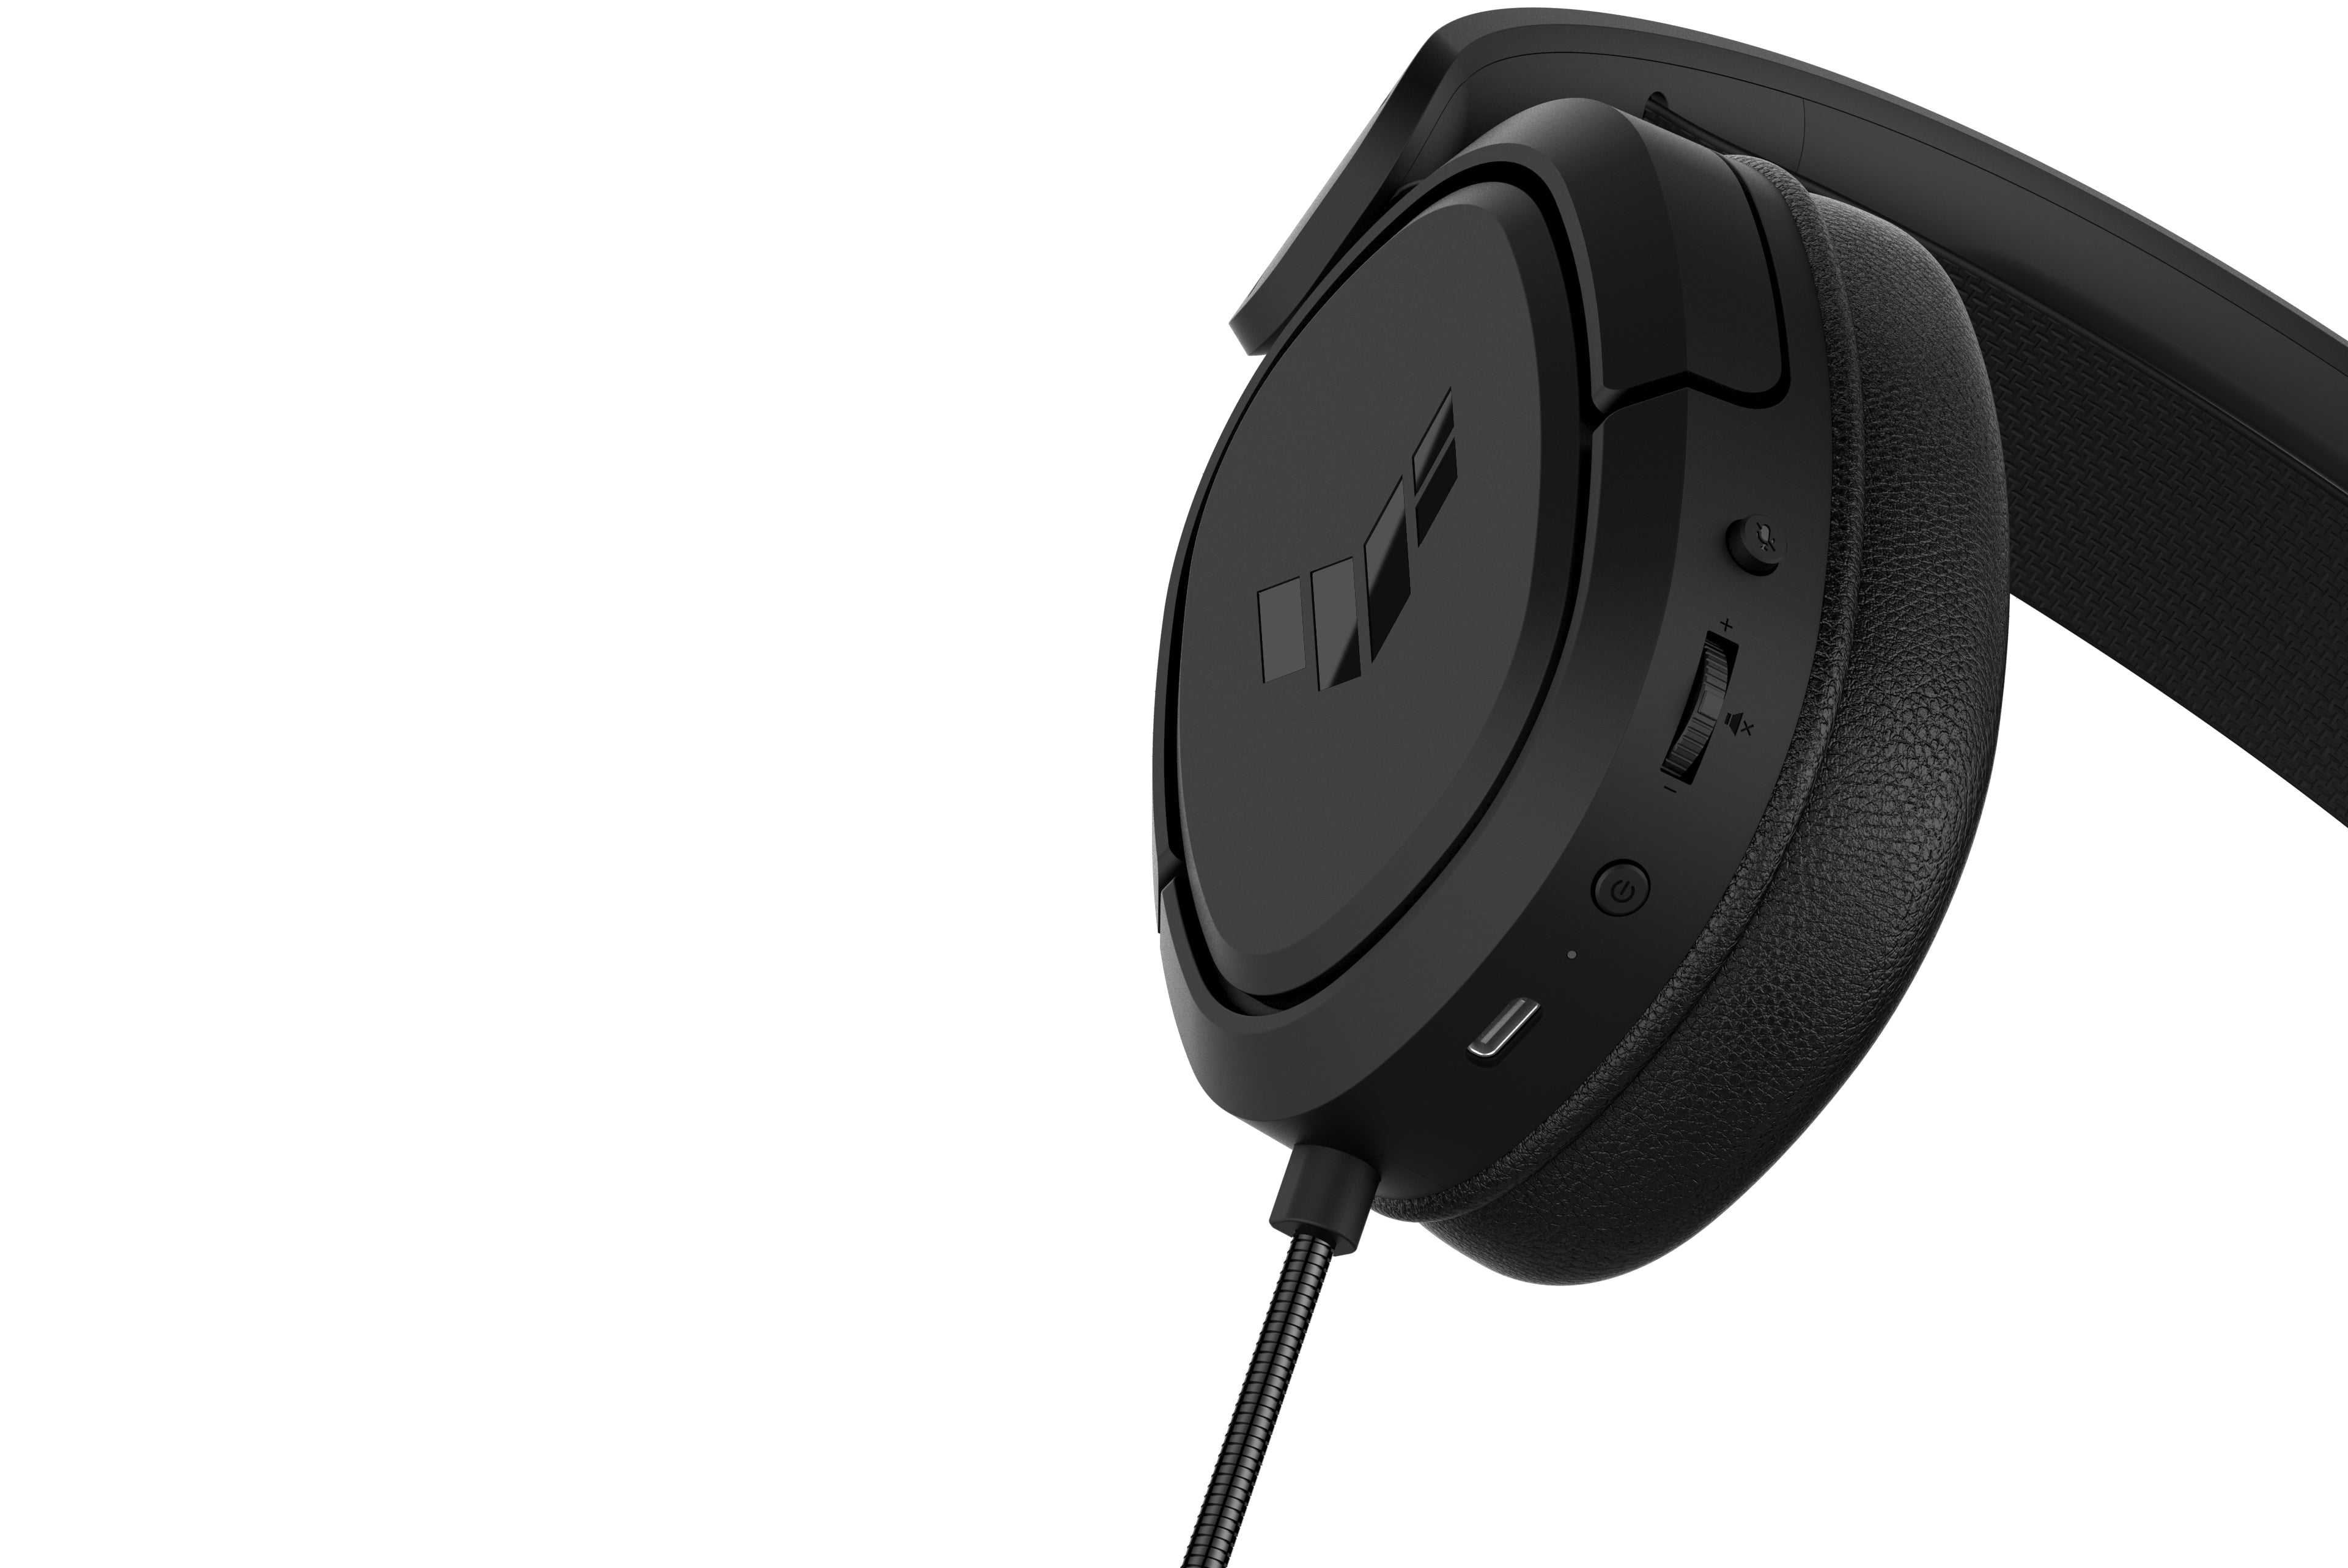 ASUS TUF H1 Wireless Gaming Headset for PC, MAC, PS4/PS5, Xbox, Nintendo, Mobilde devices - Black